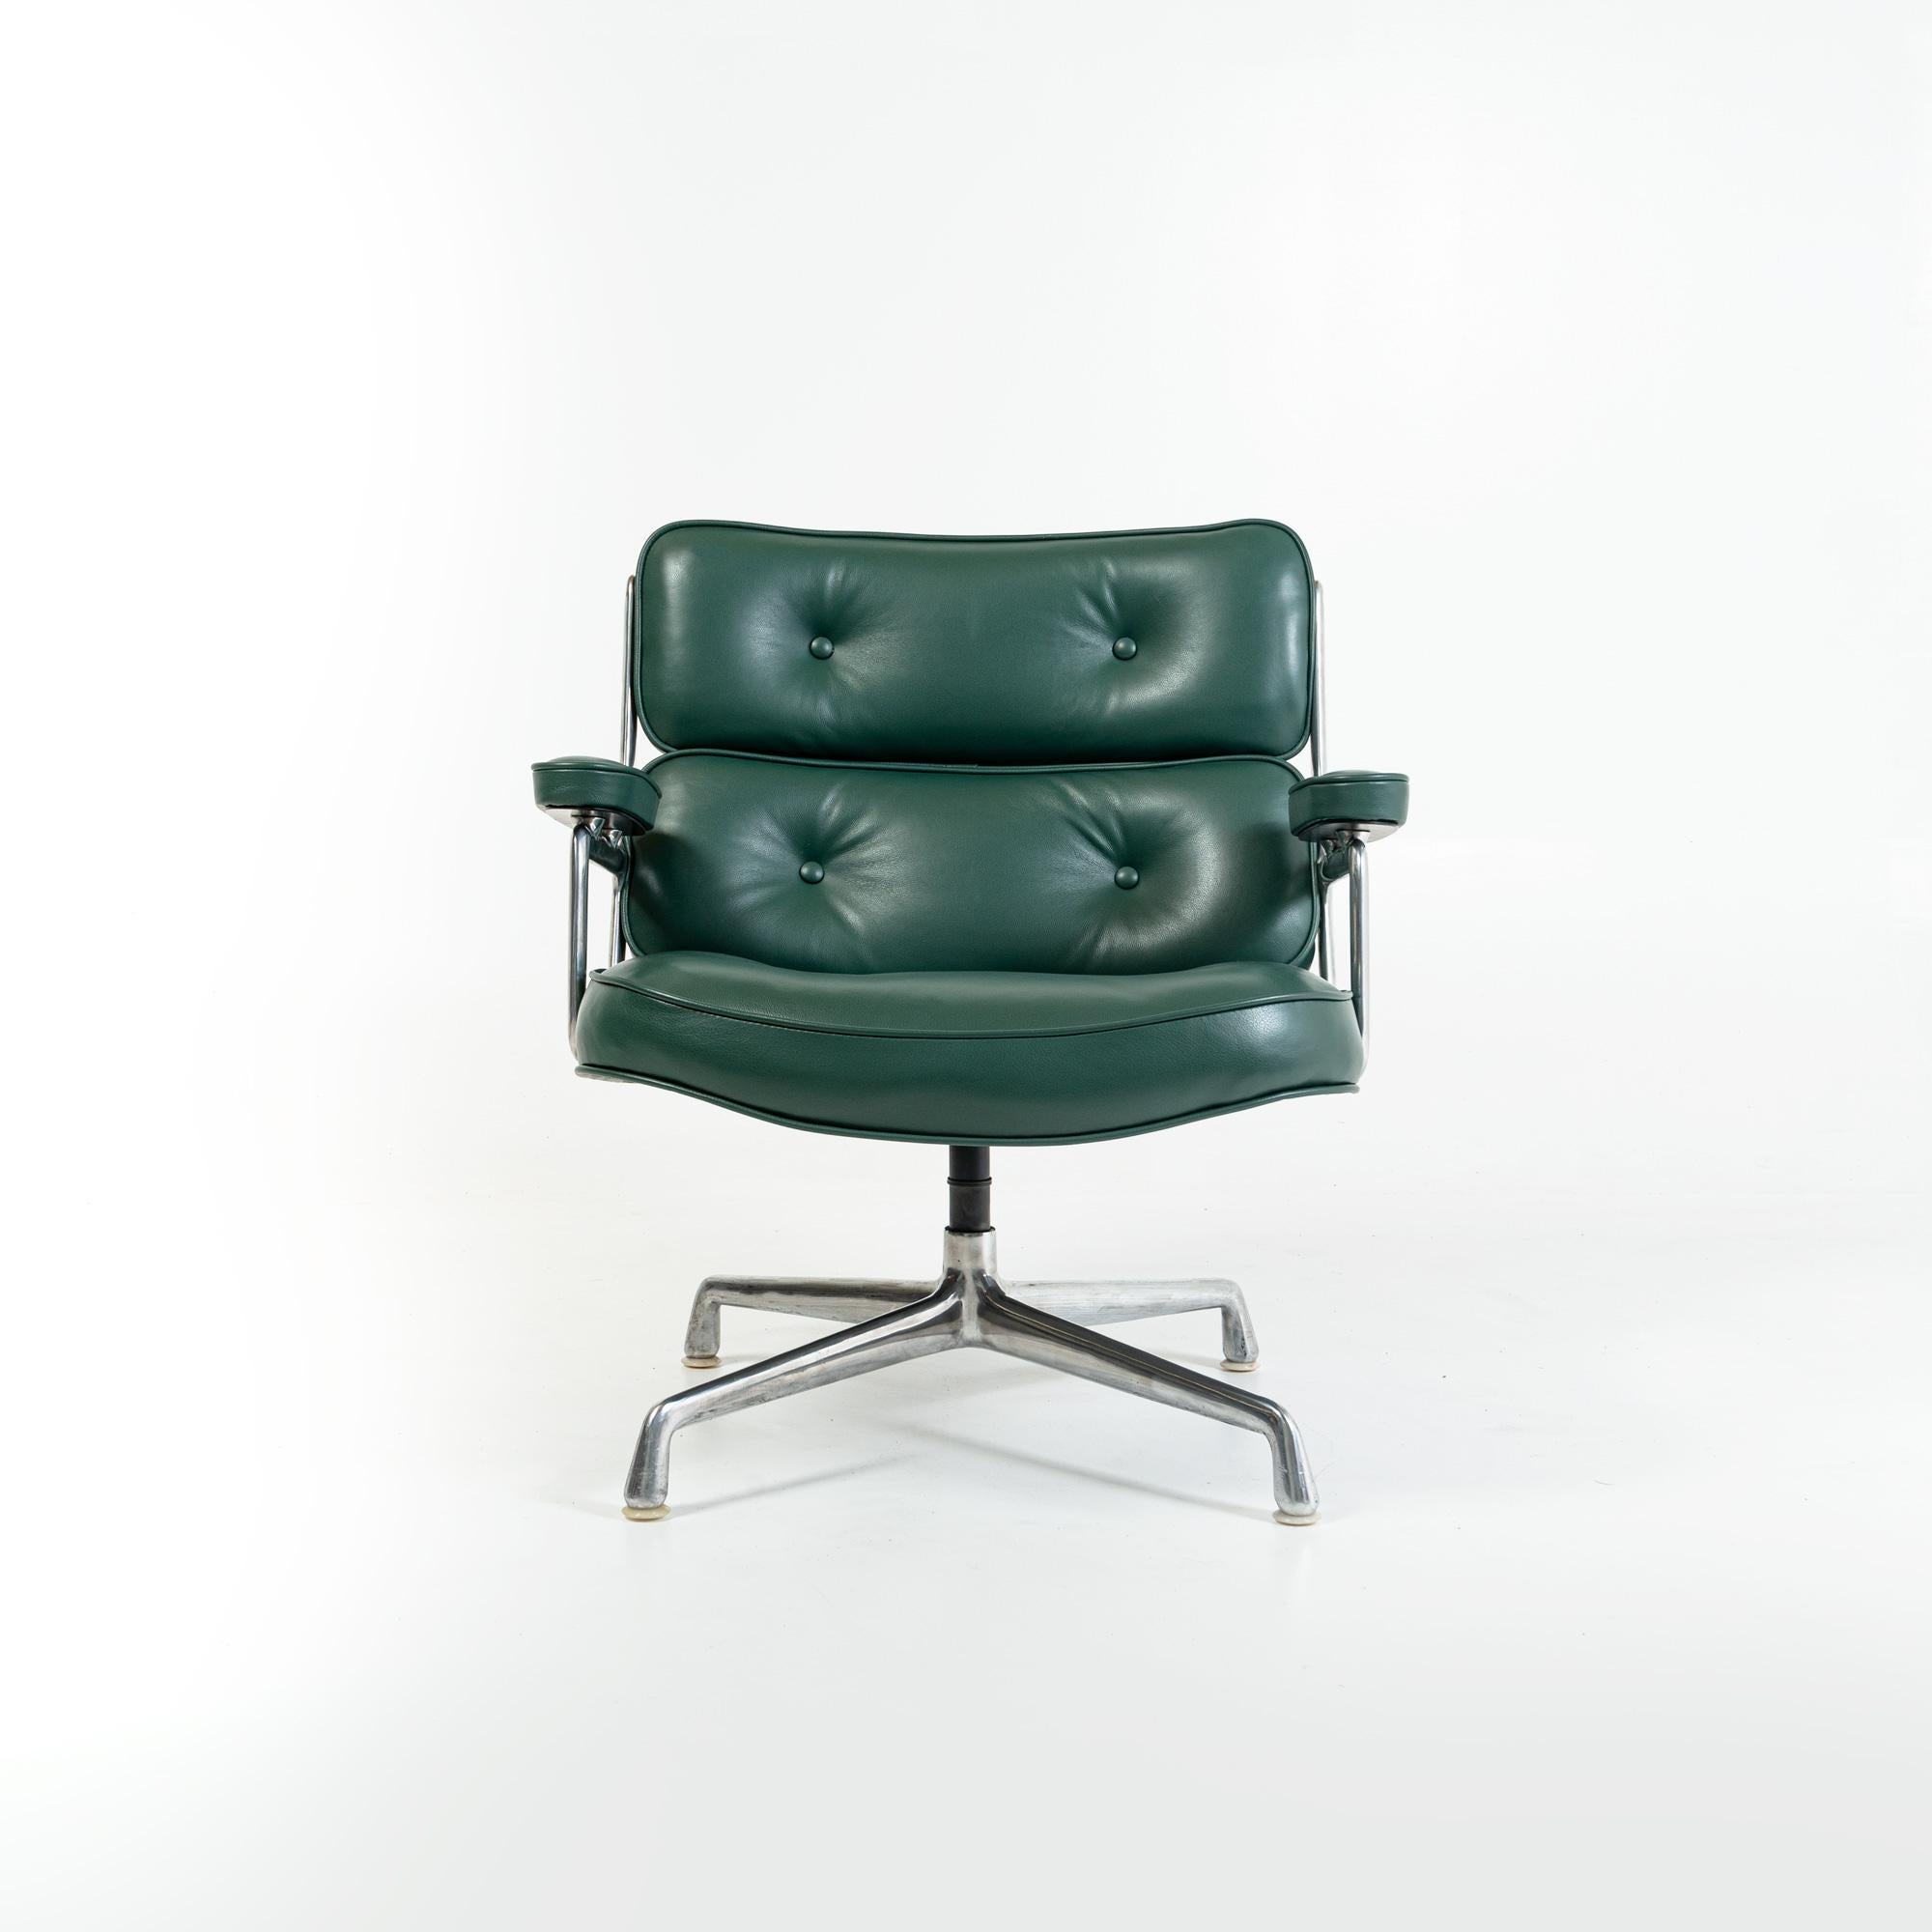 A newly restored Eames timelife Lobby chair, model ES105, reupholstered in Forest Green Aniline Leather. Priced Individually, we currently have 2.

Eames Timelife Lobby chair is the adaptation of the specially commissioned 'Lobby Chairs' for the